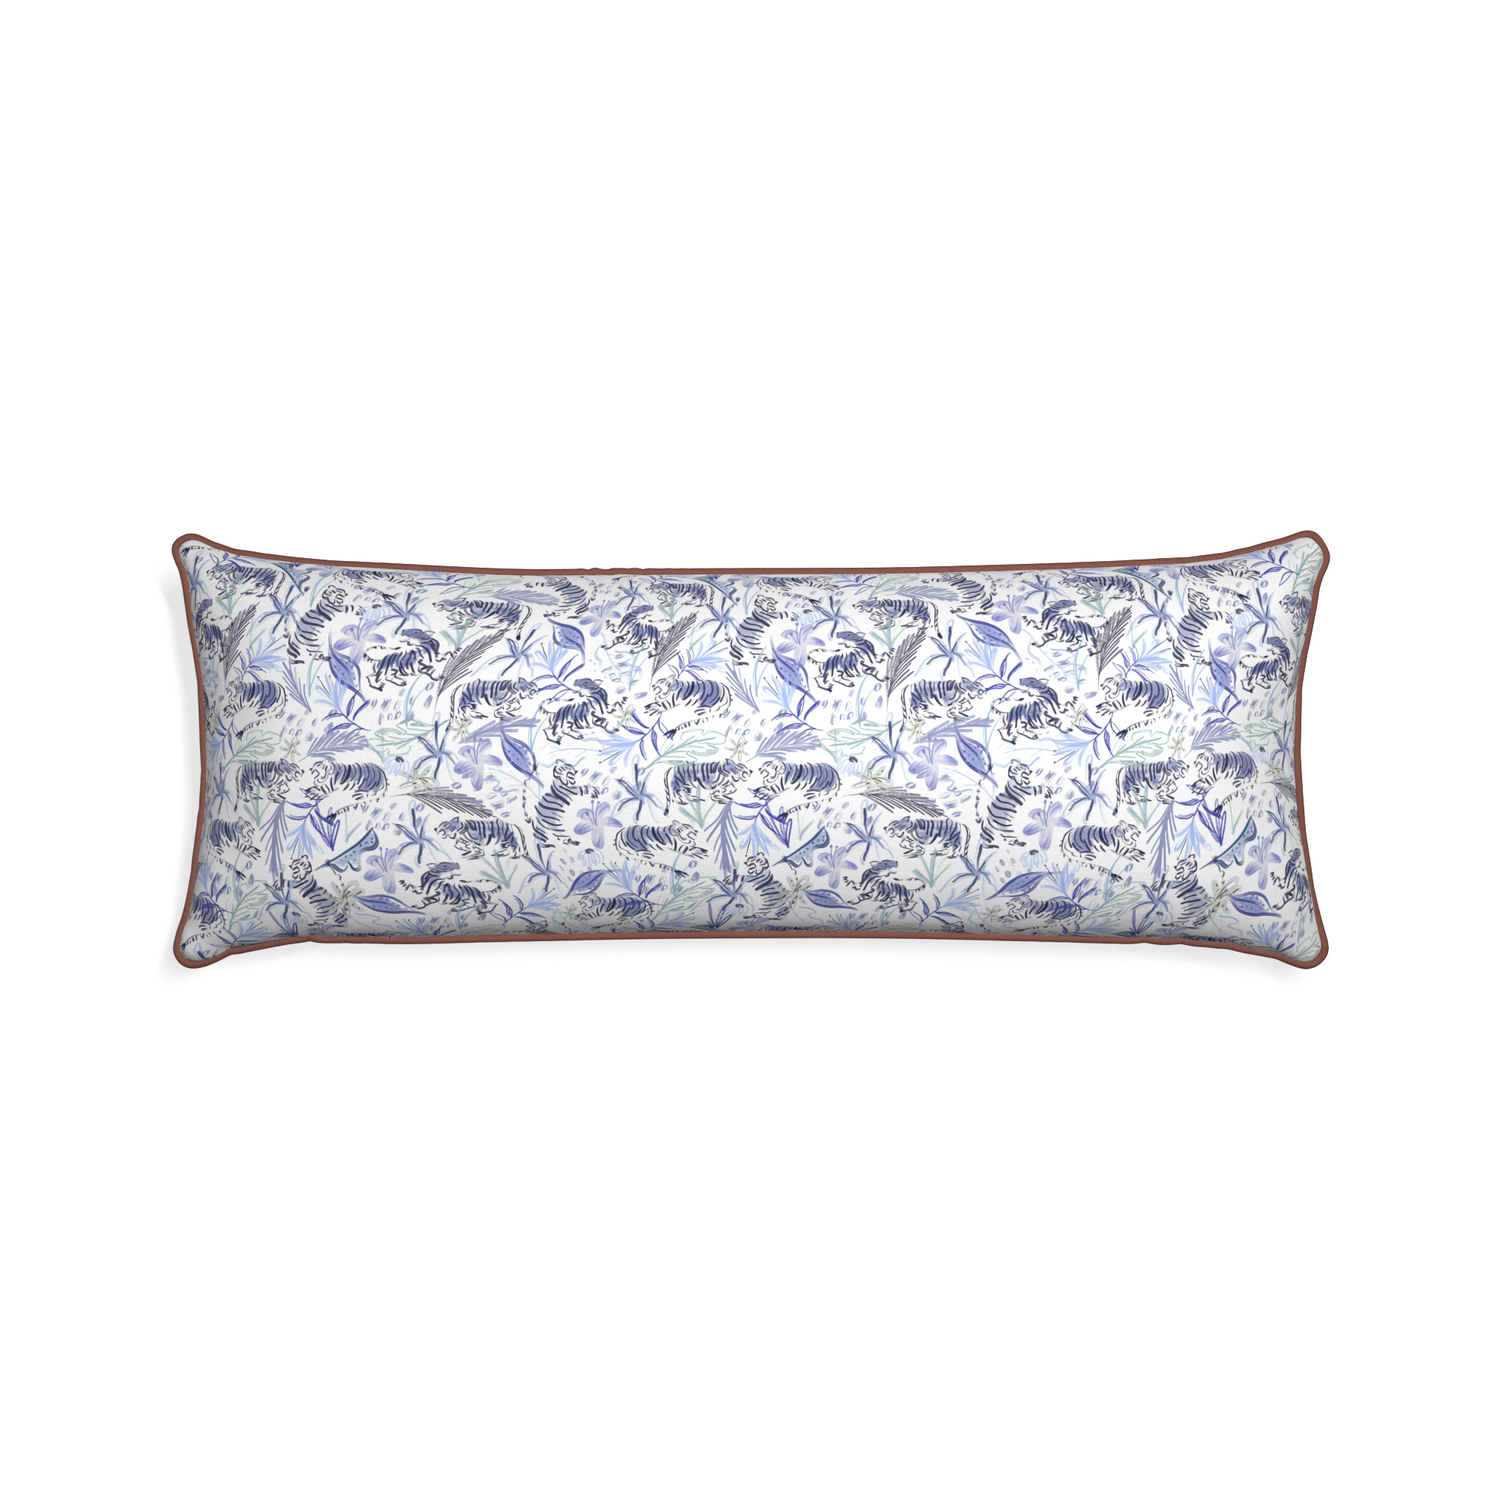 Xl-lumbar frida blue custom blue with intricate tiger designpillow with w piping on white background